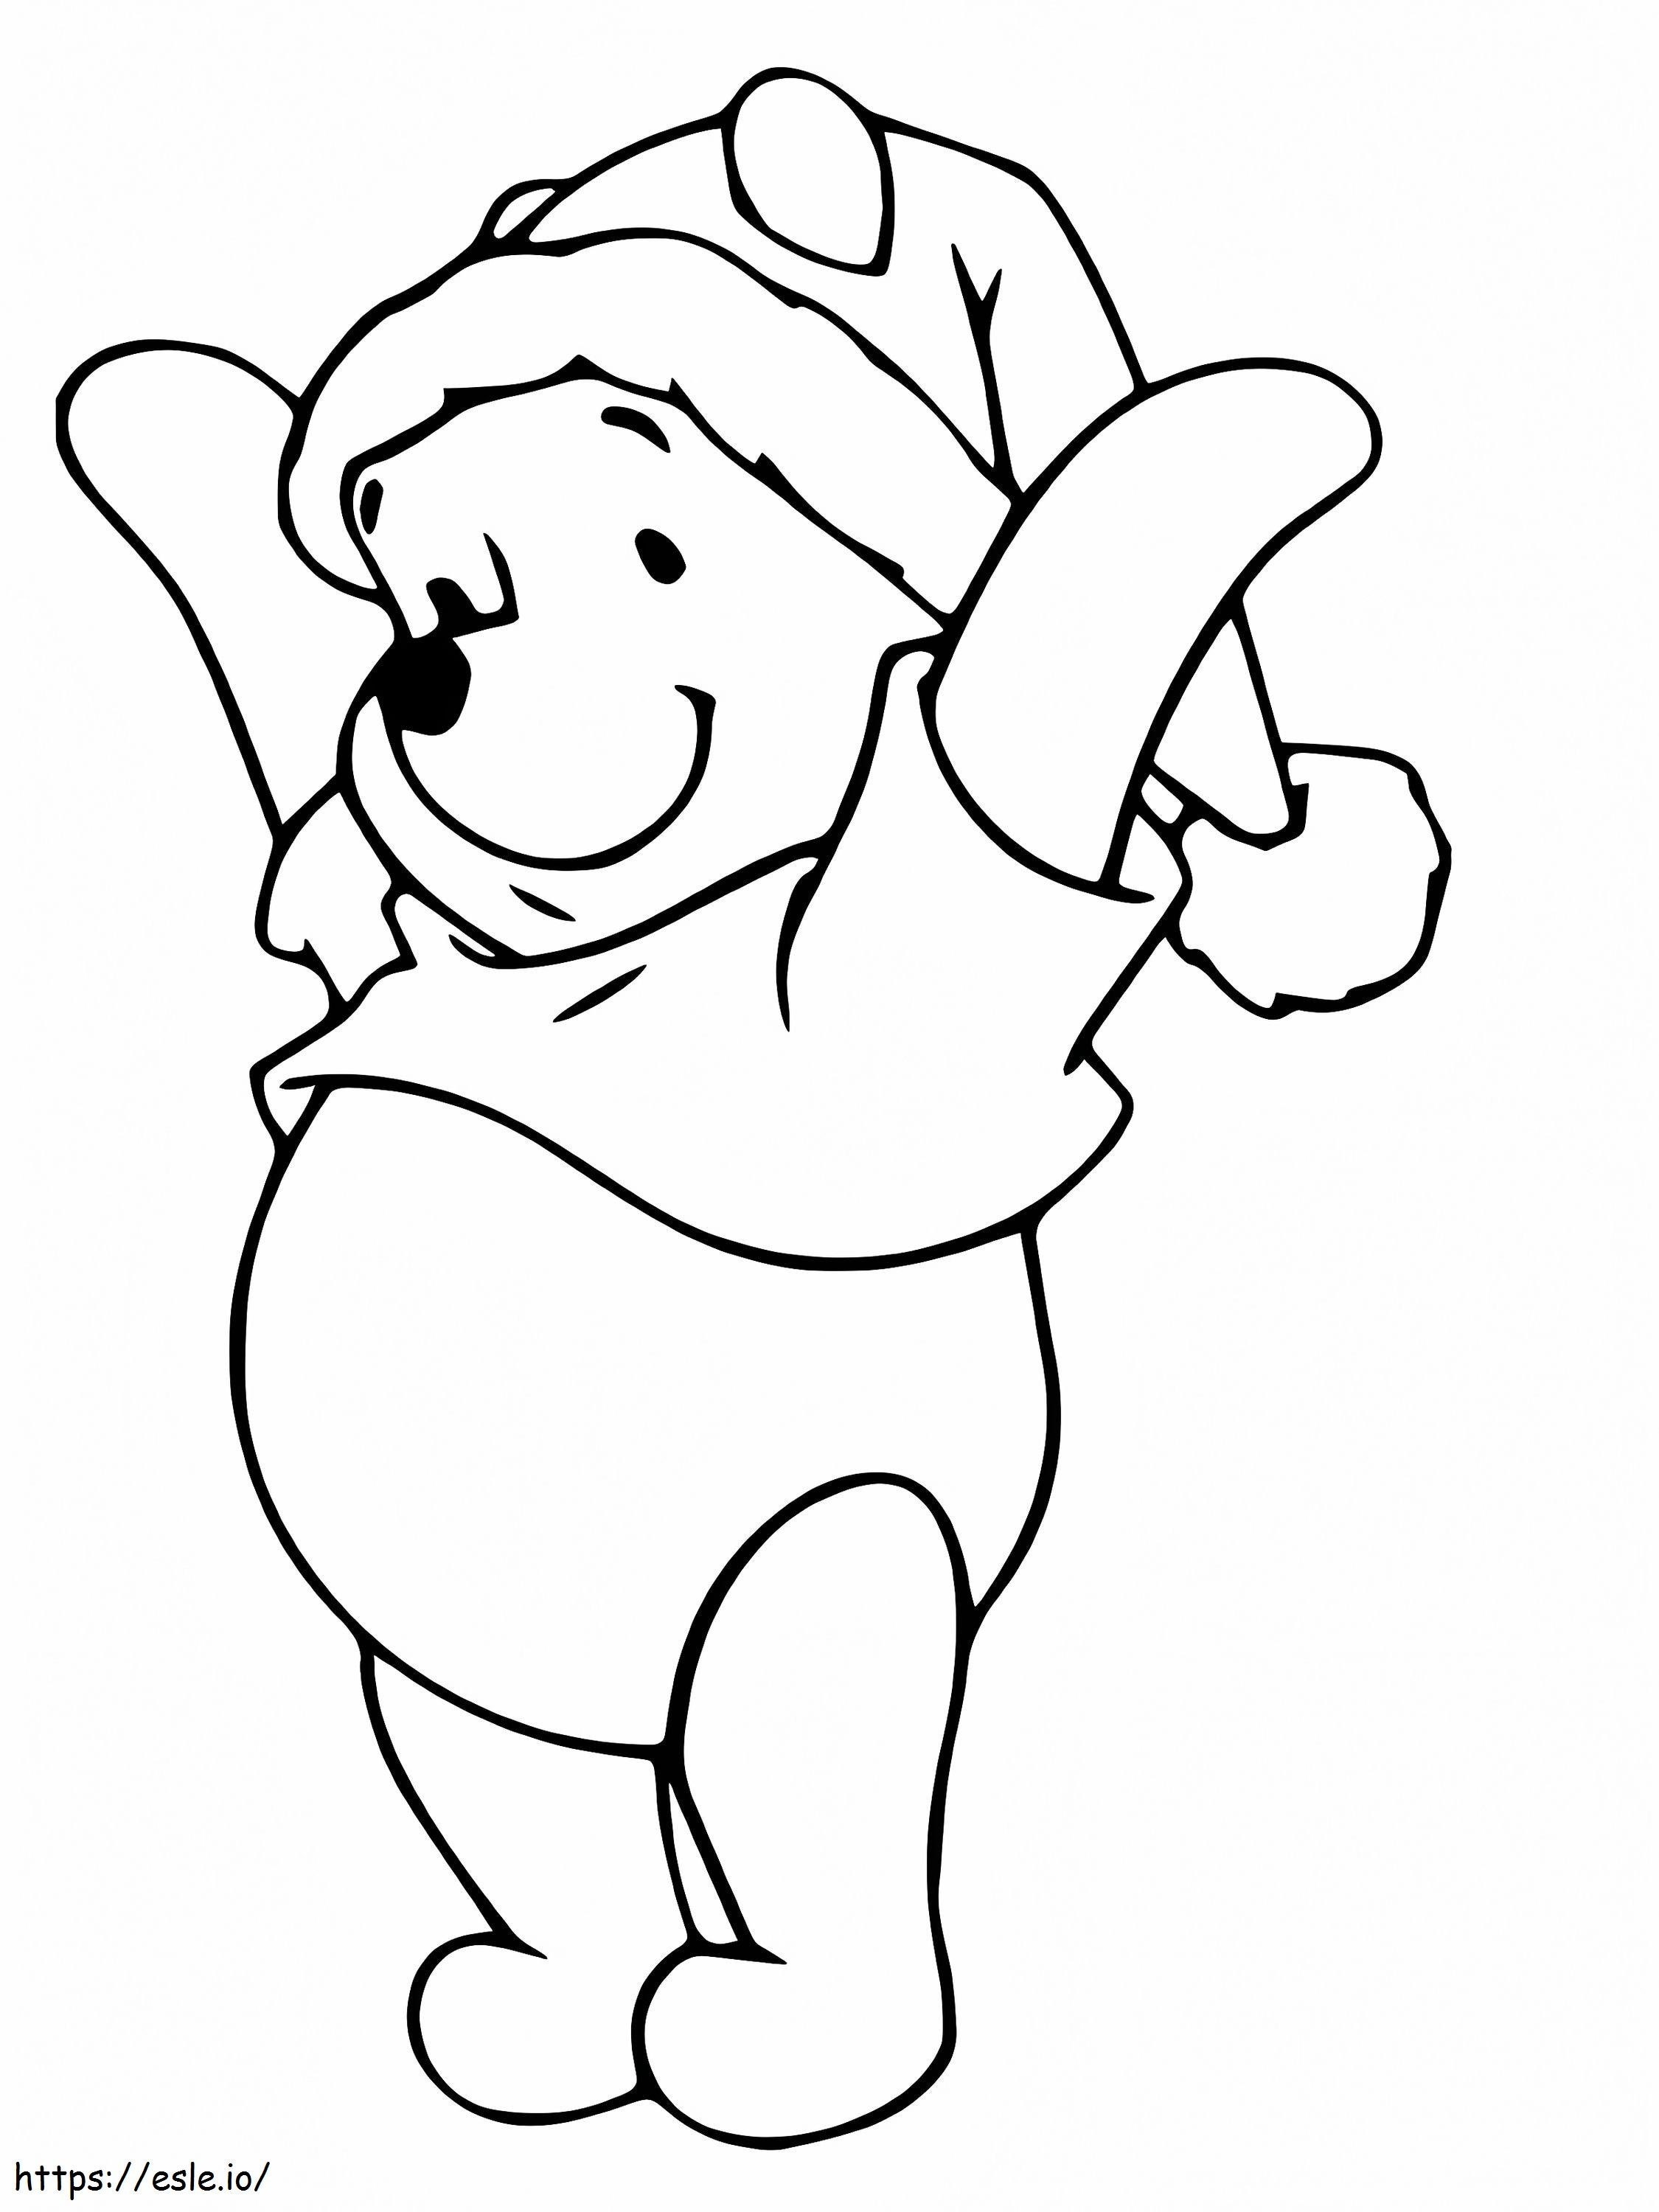 Winnie The Pooh Christmas Coloring Page coloring page